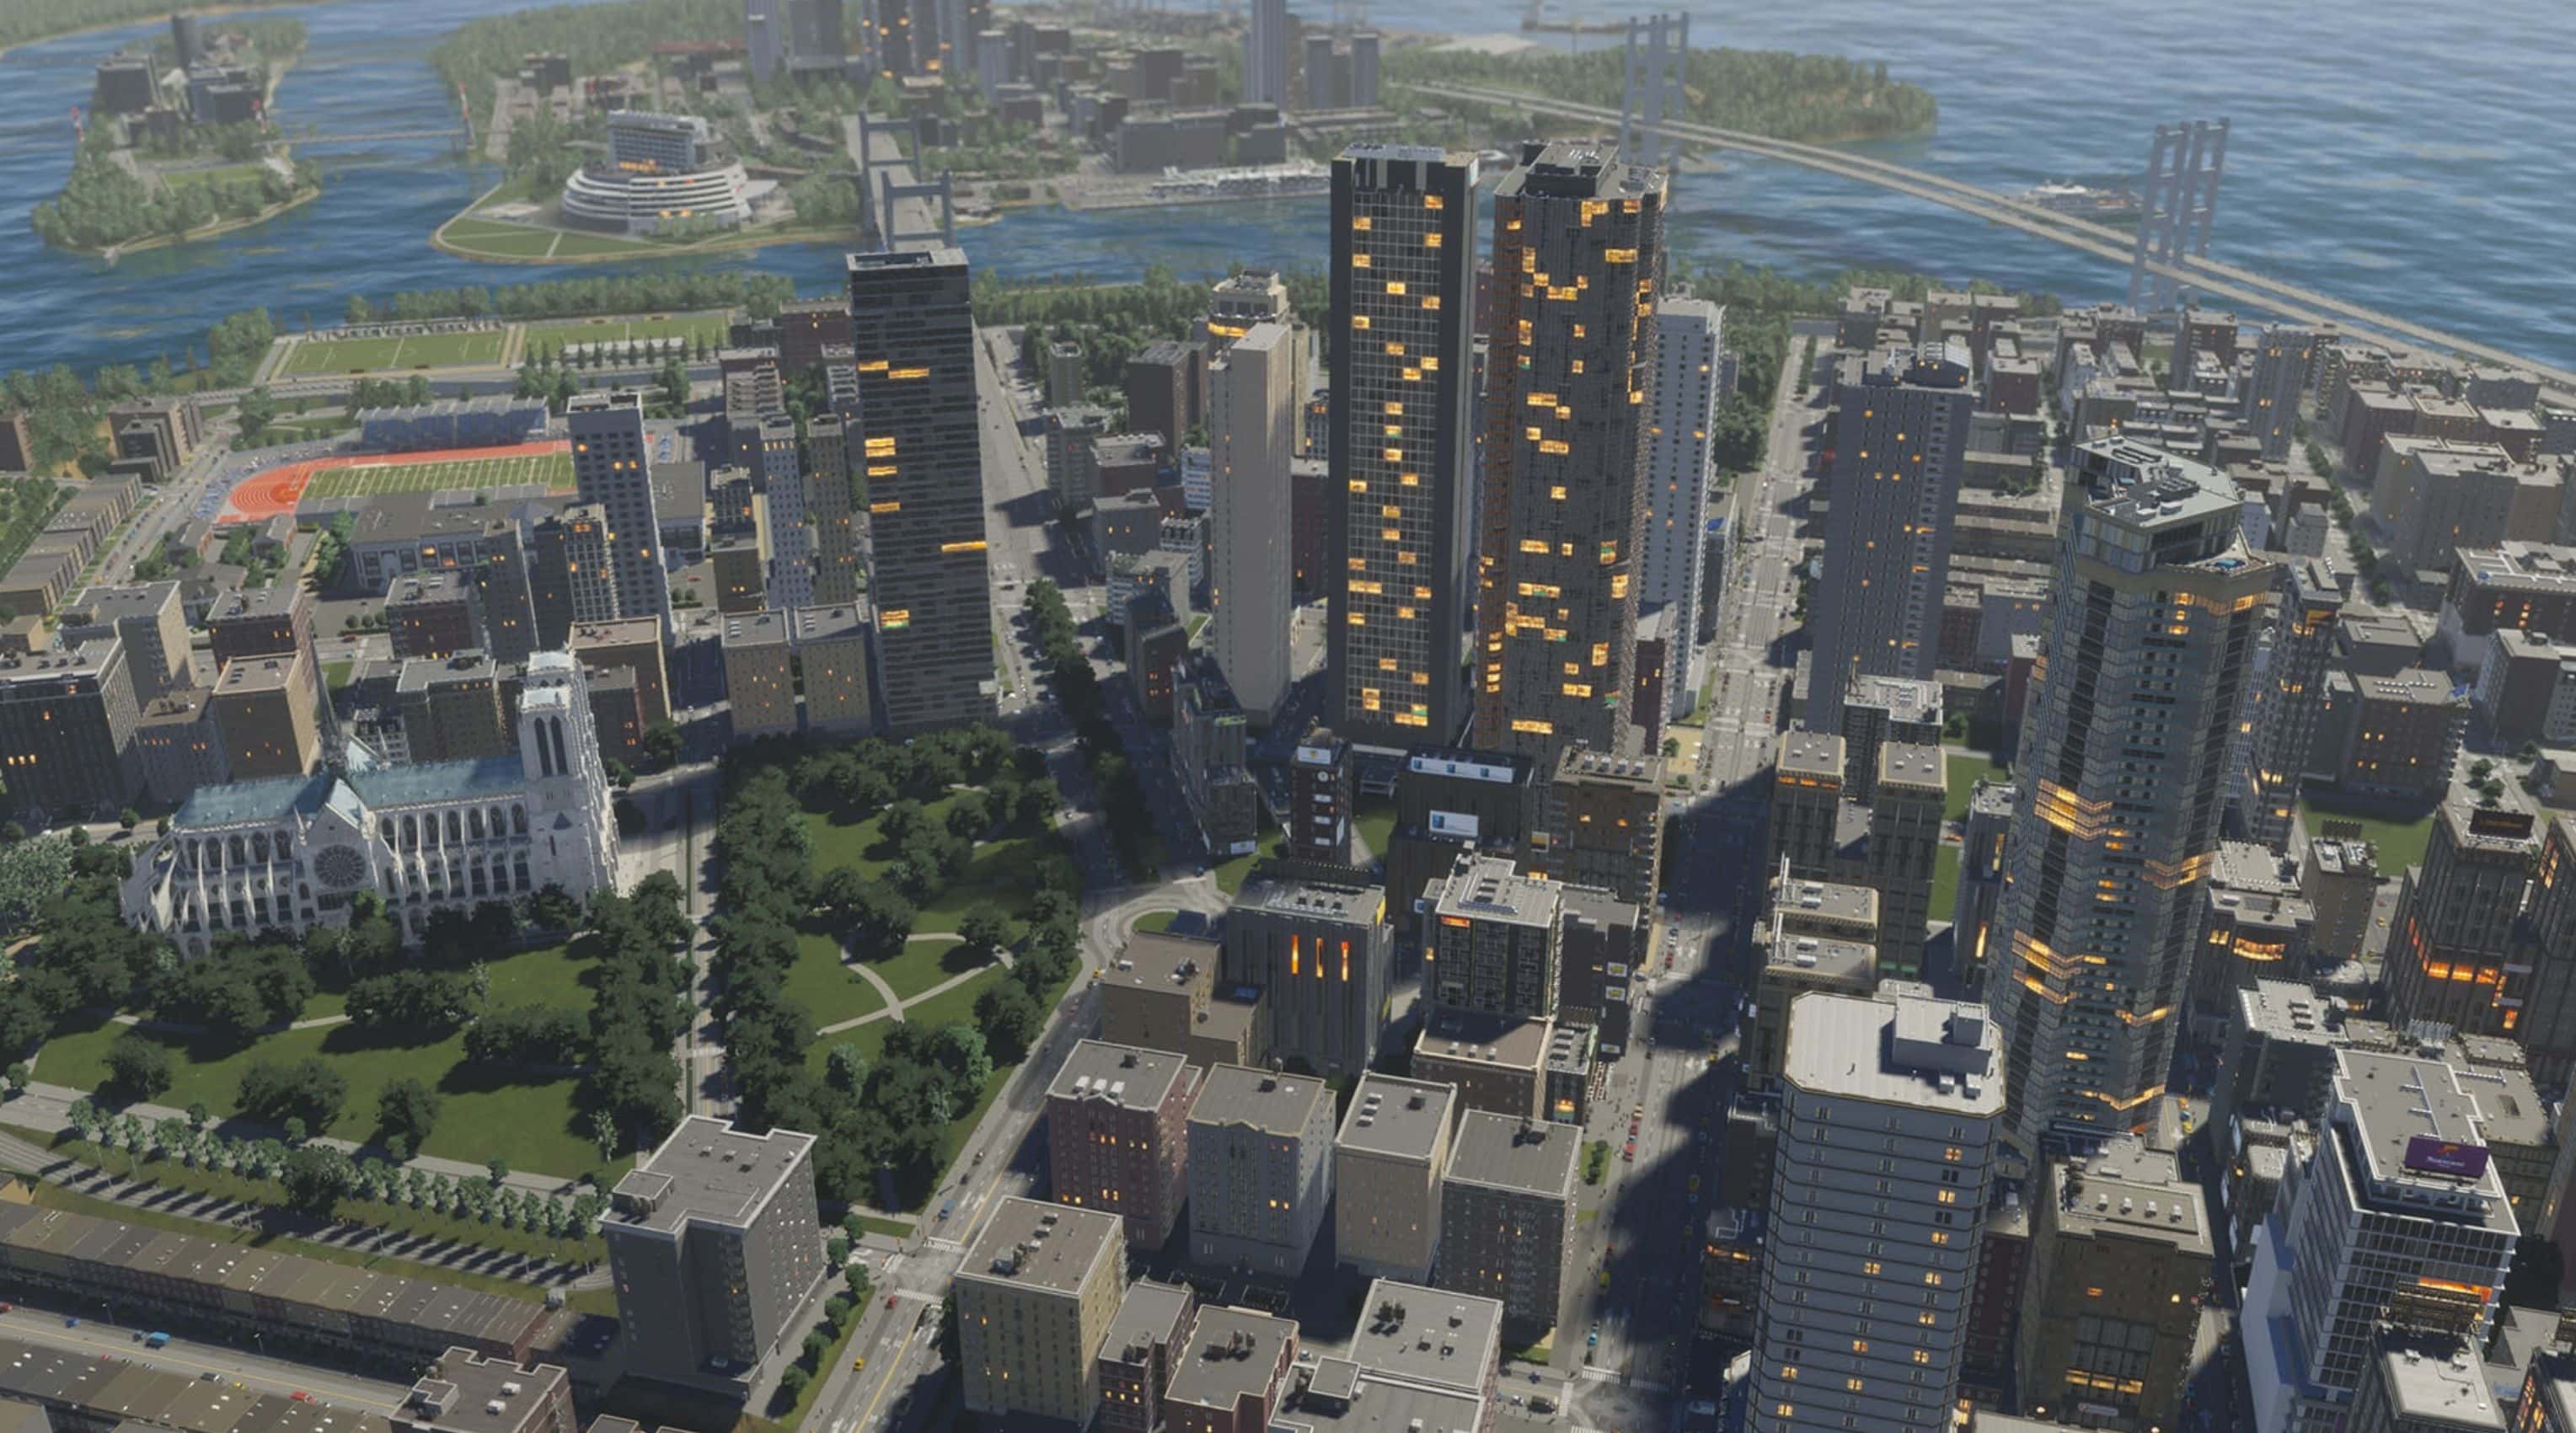 Playing with cities like an urban planner: Cities Skylines